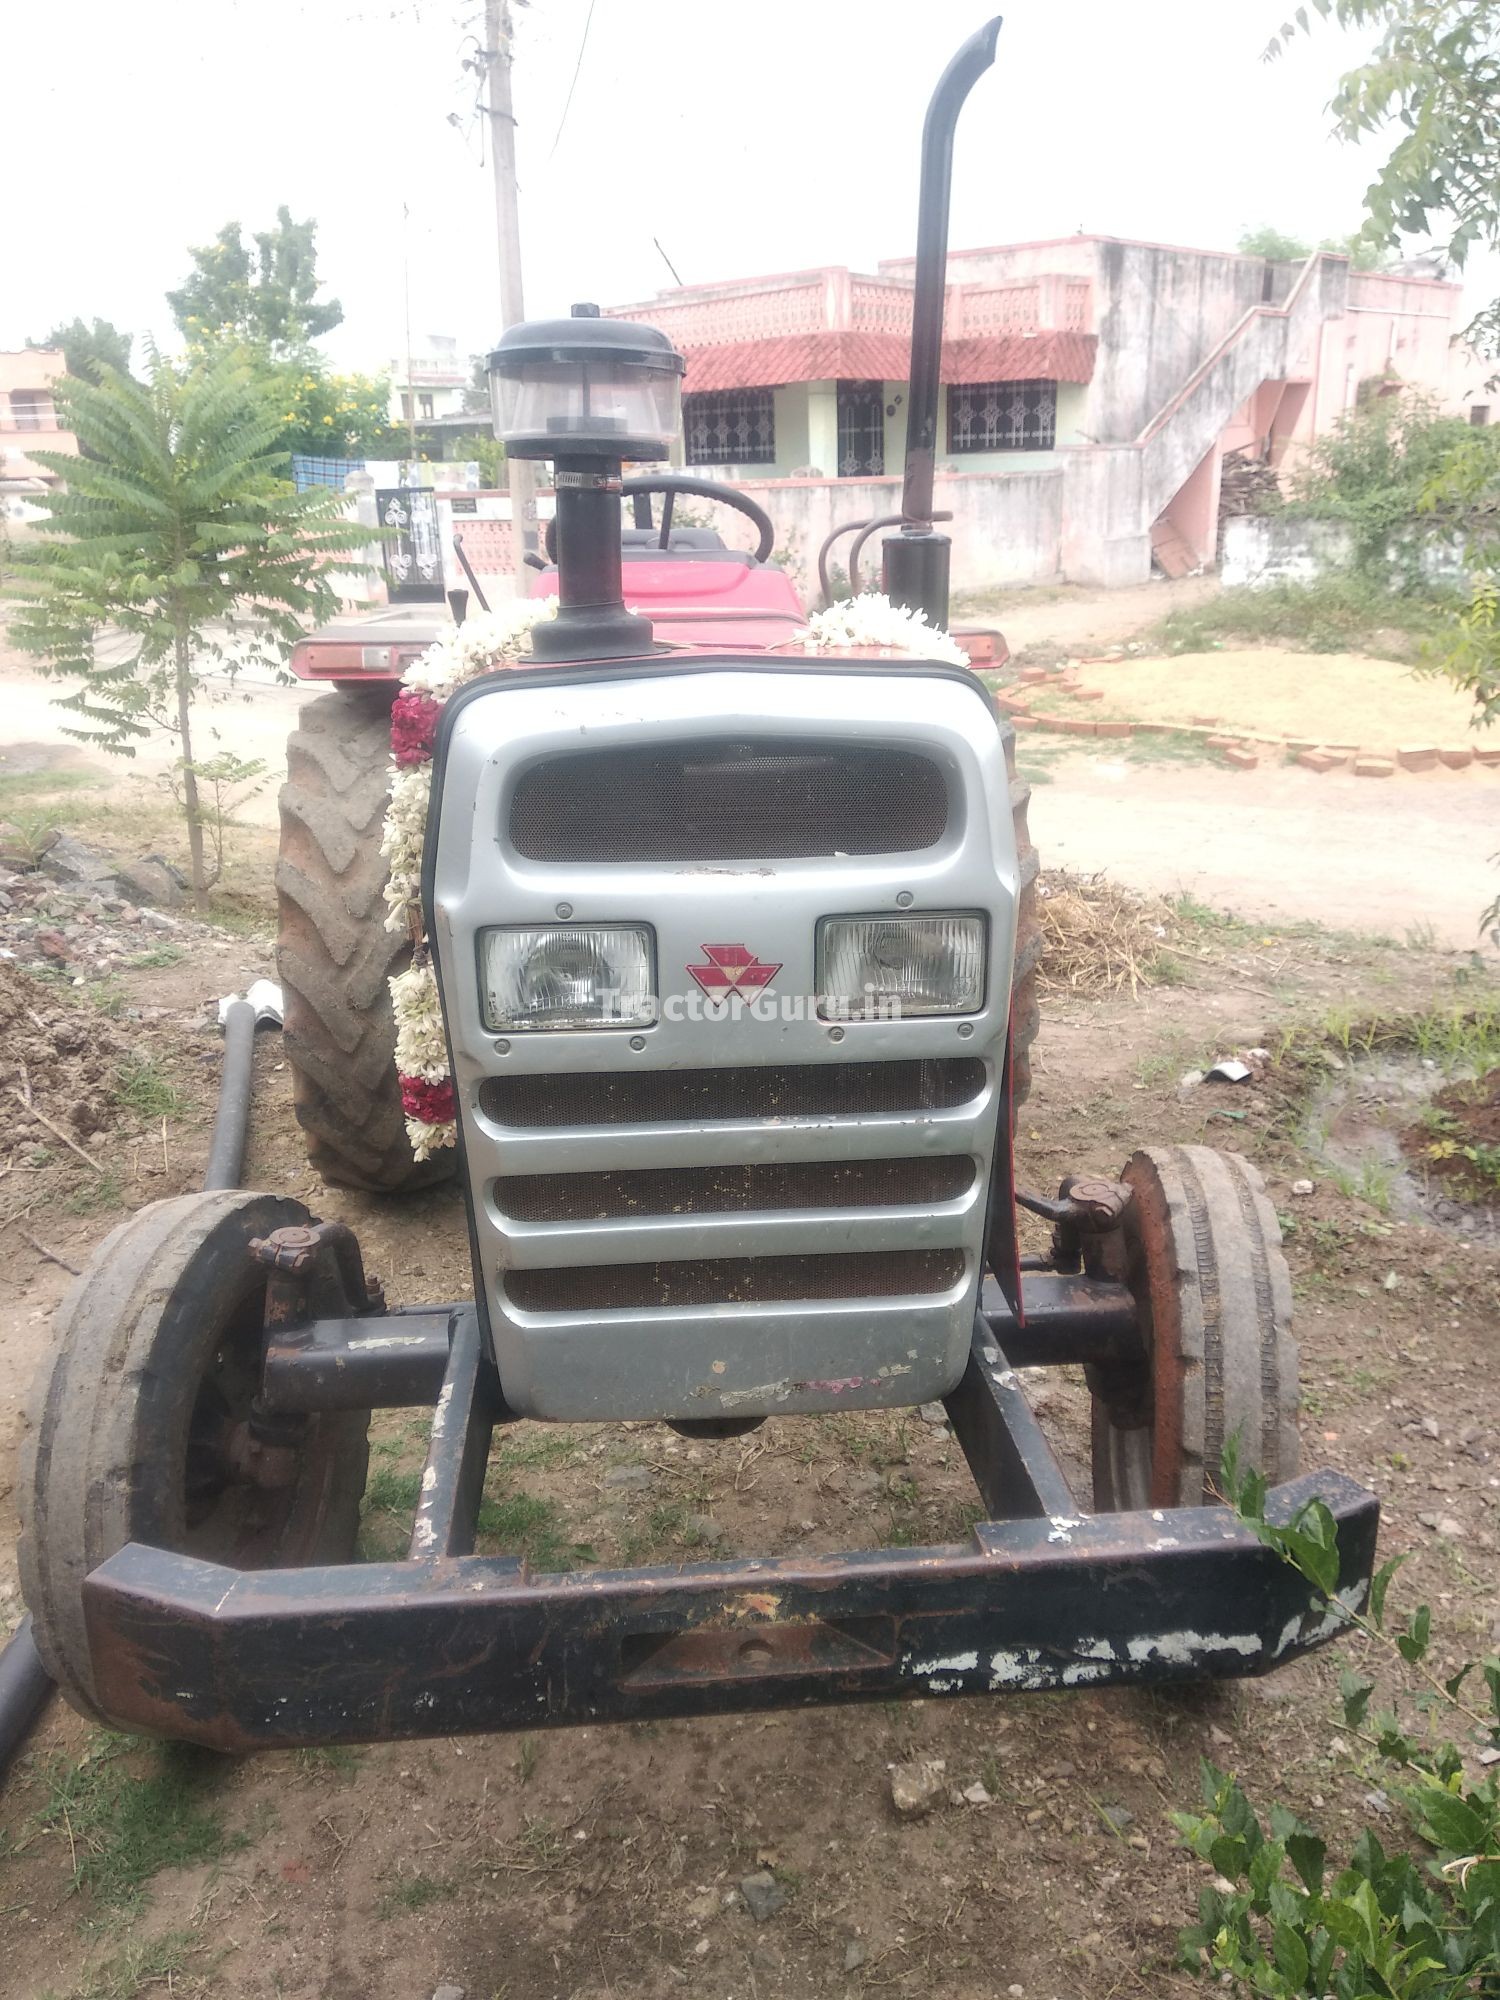 Get Second Hand Massey Ferguson 7250 DI Tractor in Good Condition - 5343